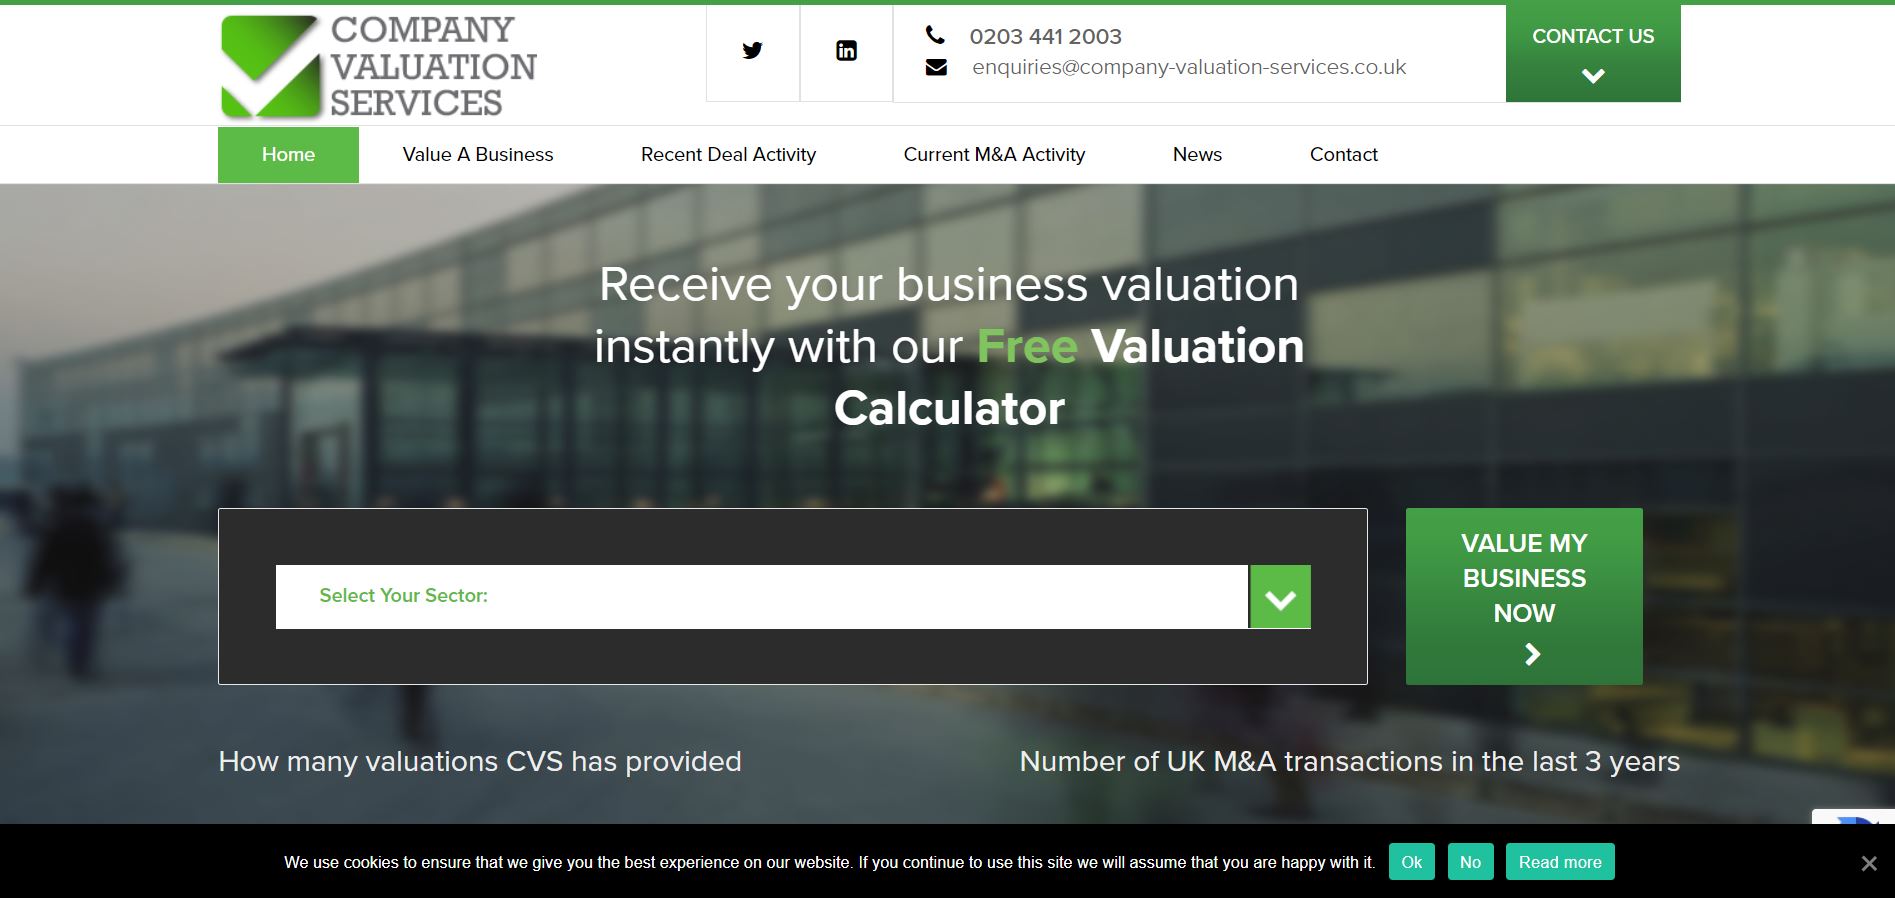 Company valuation services